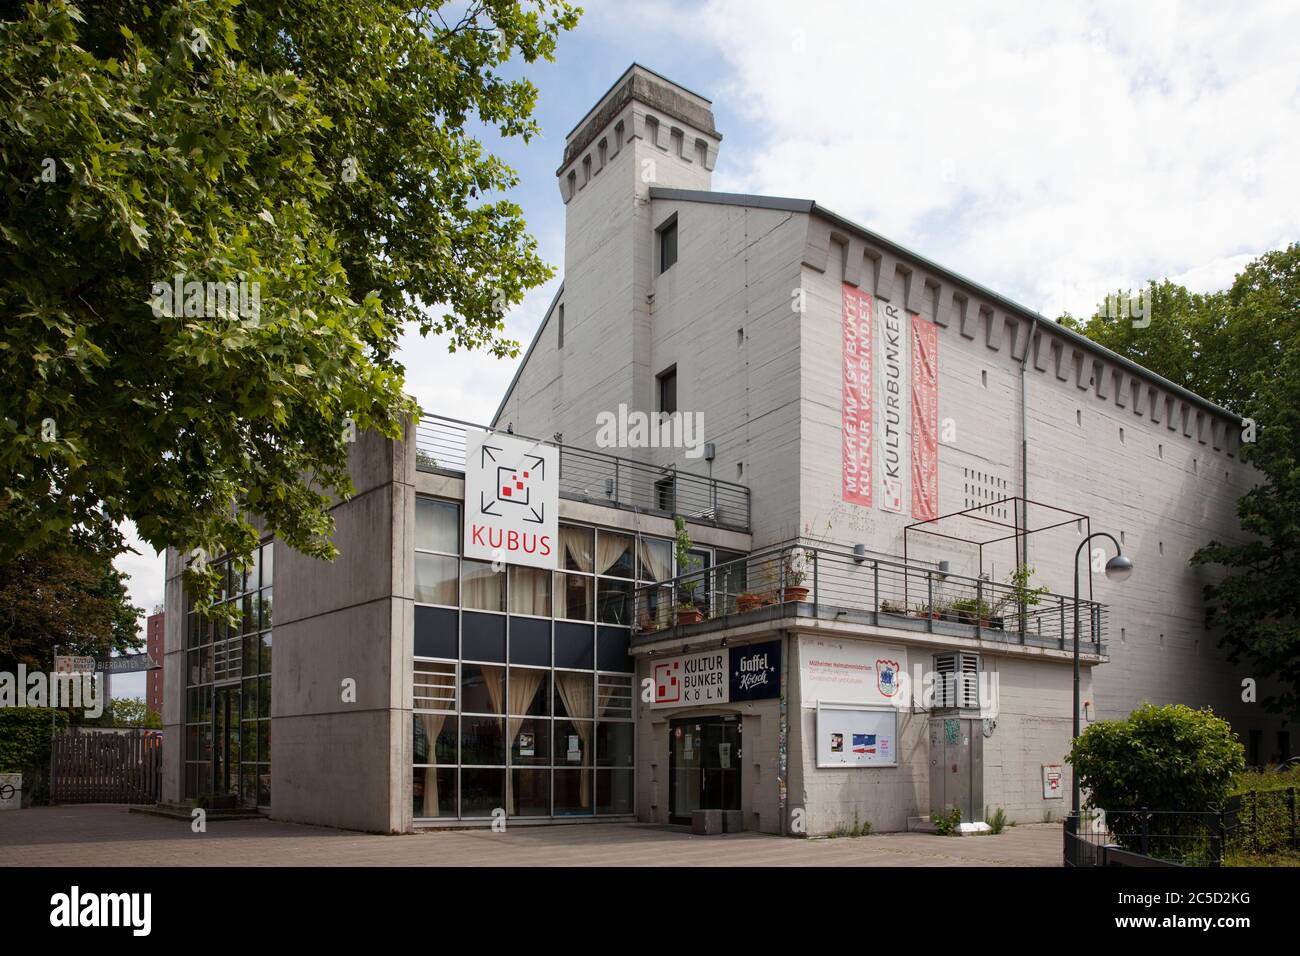 Kulturbunker (culture bunker) on Berliner street in the district Muelheim, former high bunker from the Second World War, today a cultural center, Colo Stock Photo